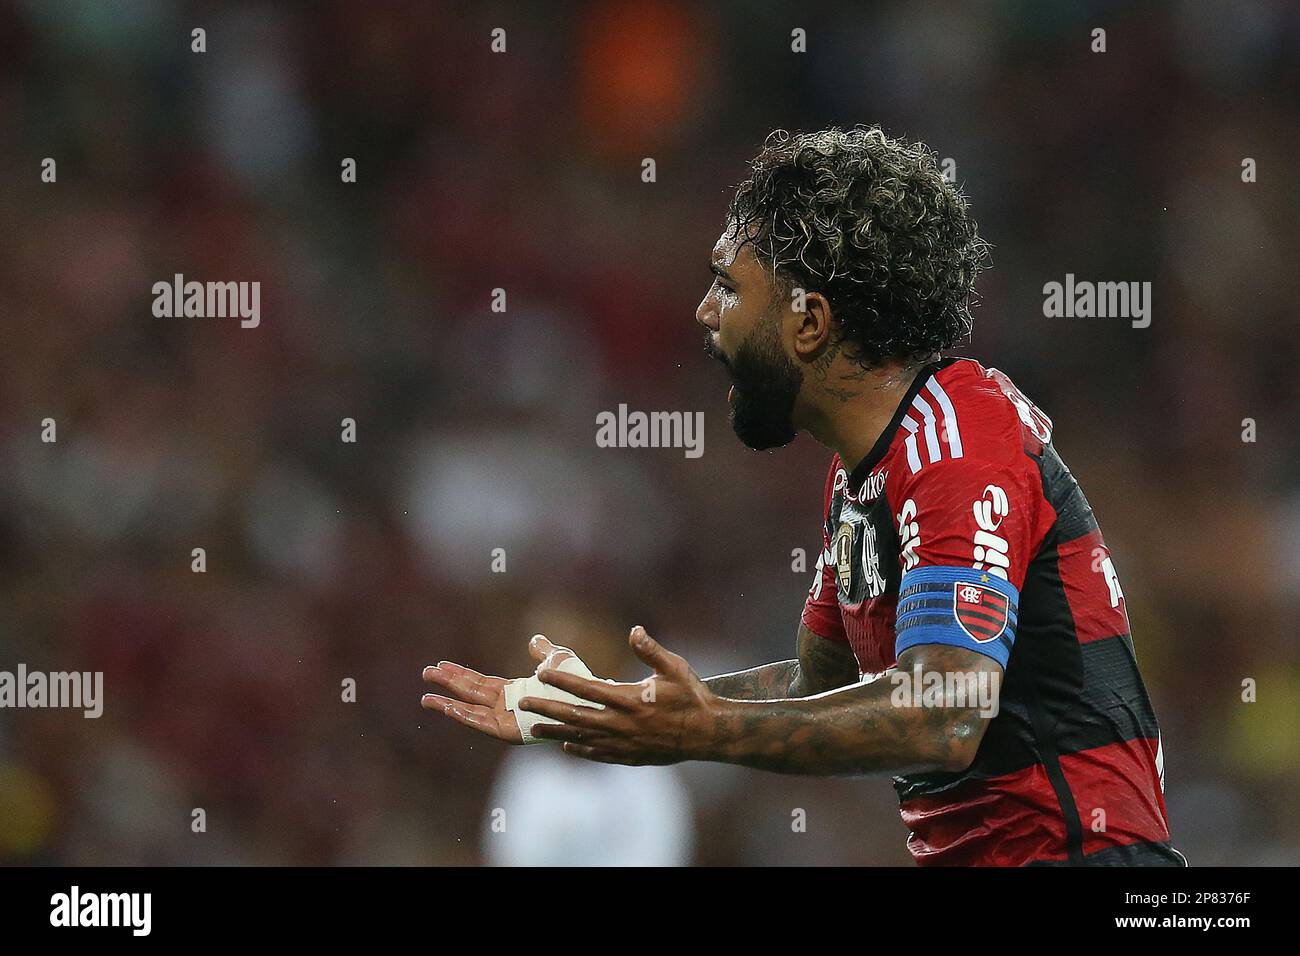 Rio de Janeiro, Brazil, 08th Mar, 2023. Gabriel Barbosa of Flamengo complains to the referee after his goal is annulled during the match between Flamengo and Fluminense, for the Championship Carioca 2023, at Maracana Stadium, in Rio de Janeiro on February 16. Photo: Daniel Castelo Branco/DiaEsportivo/Alamy Live News Stock Photo